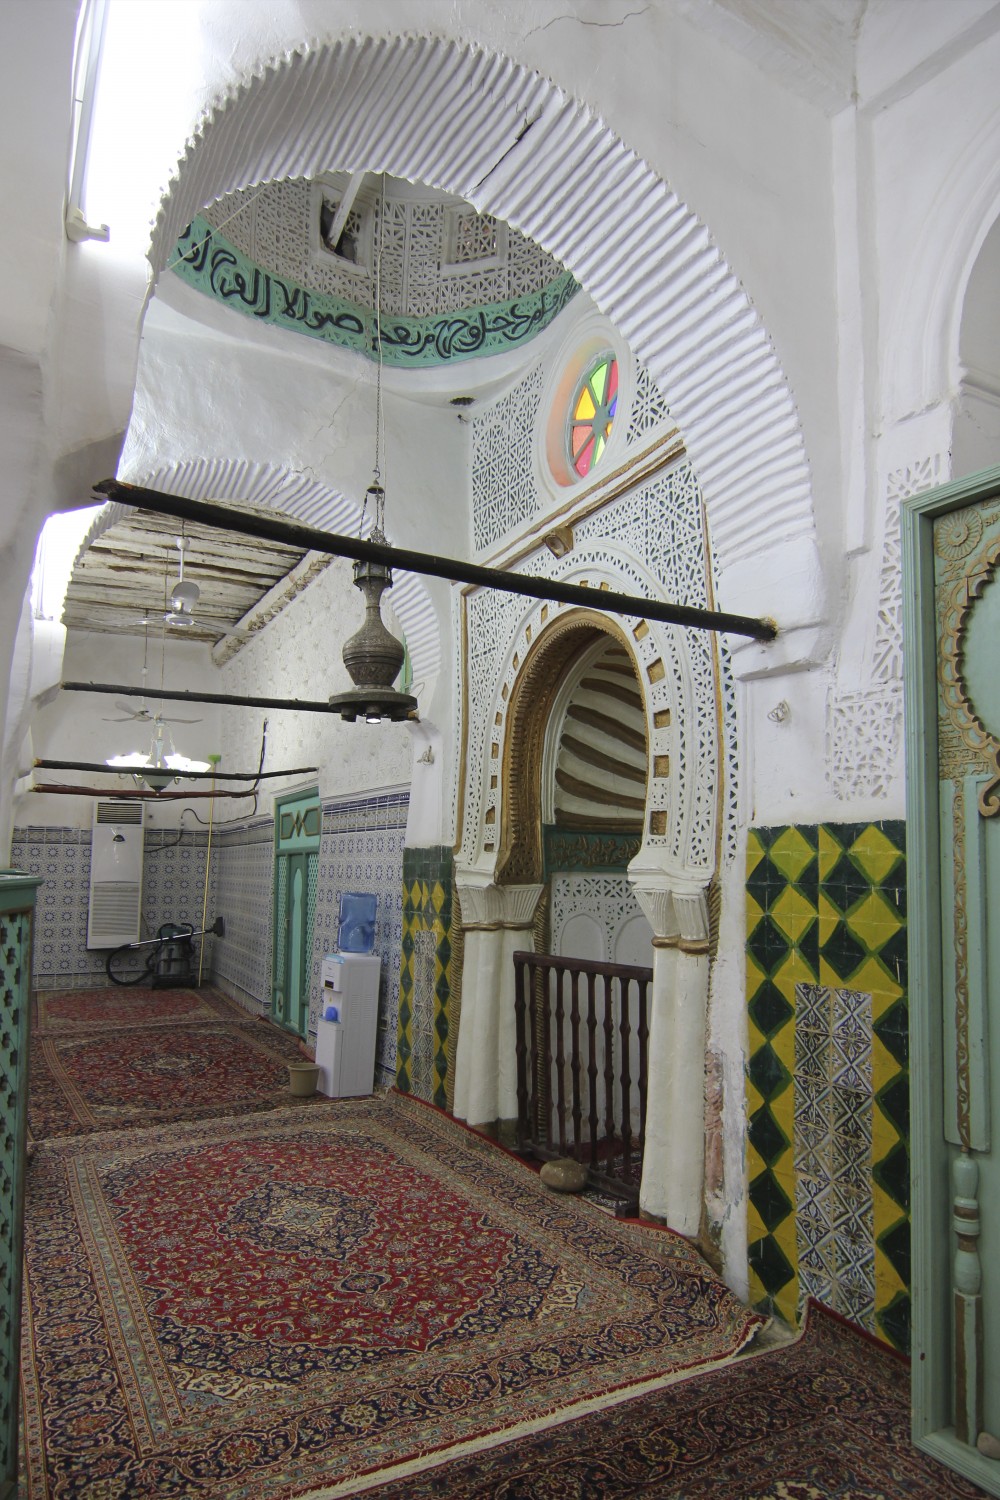 View of the qibla wall showing mihrab and dome, and palm trunk ceiling